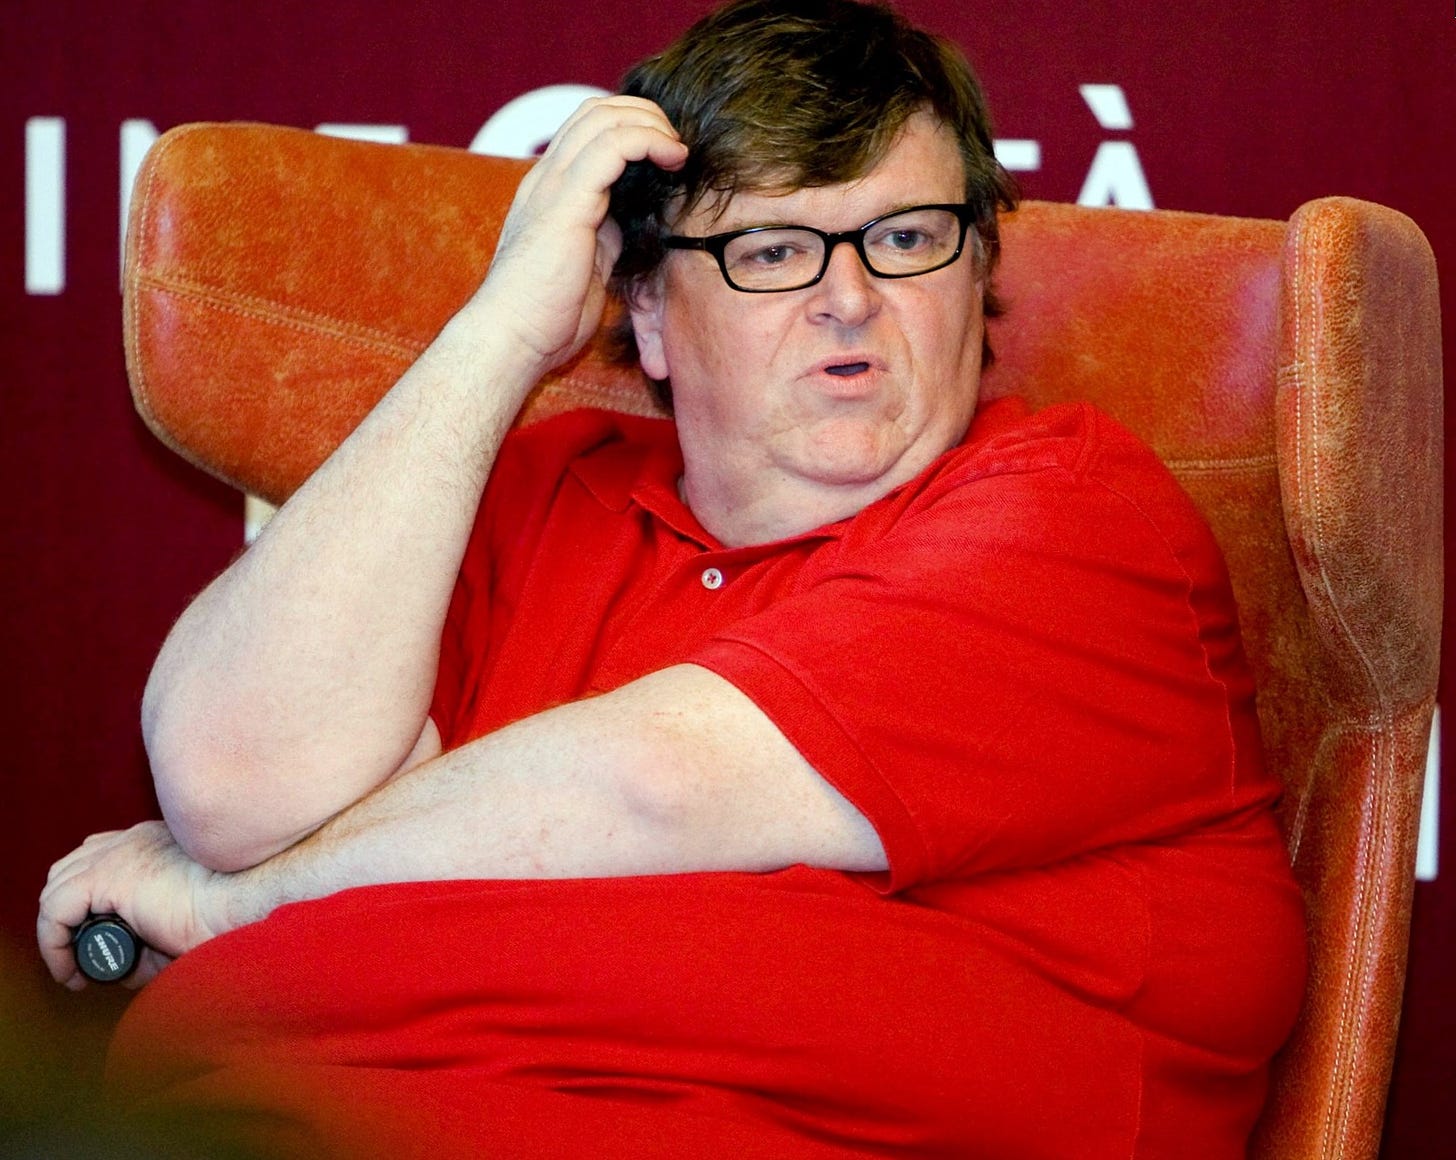 Image result from http://starschanges.com/michael-moore-celebrity-weight-changes/